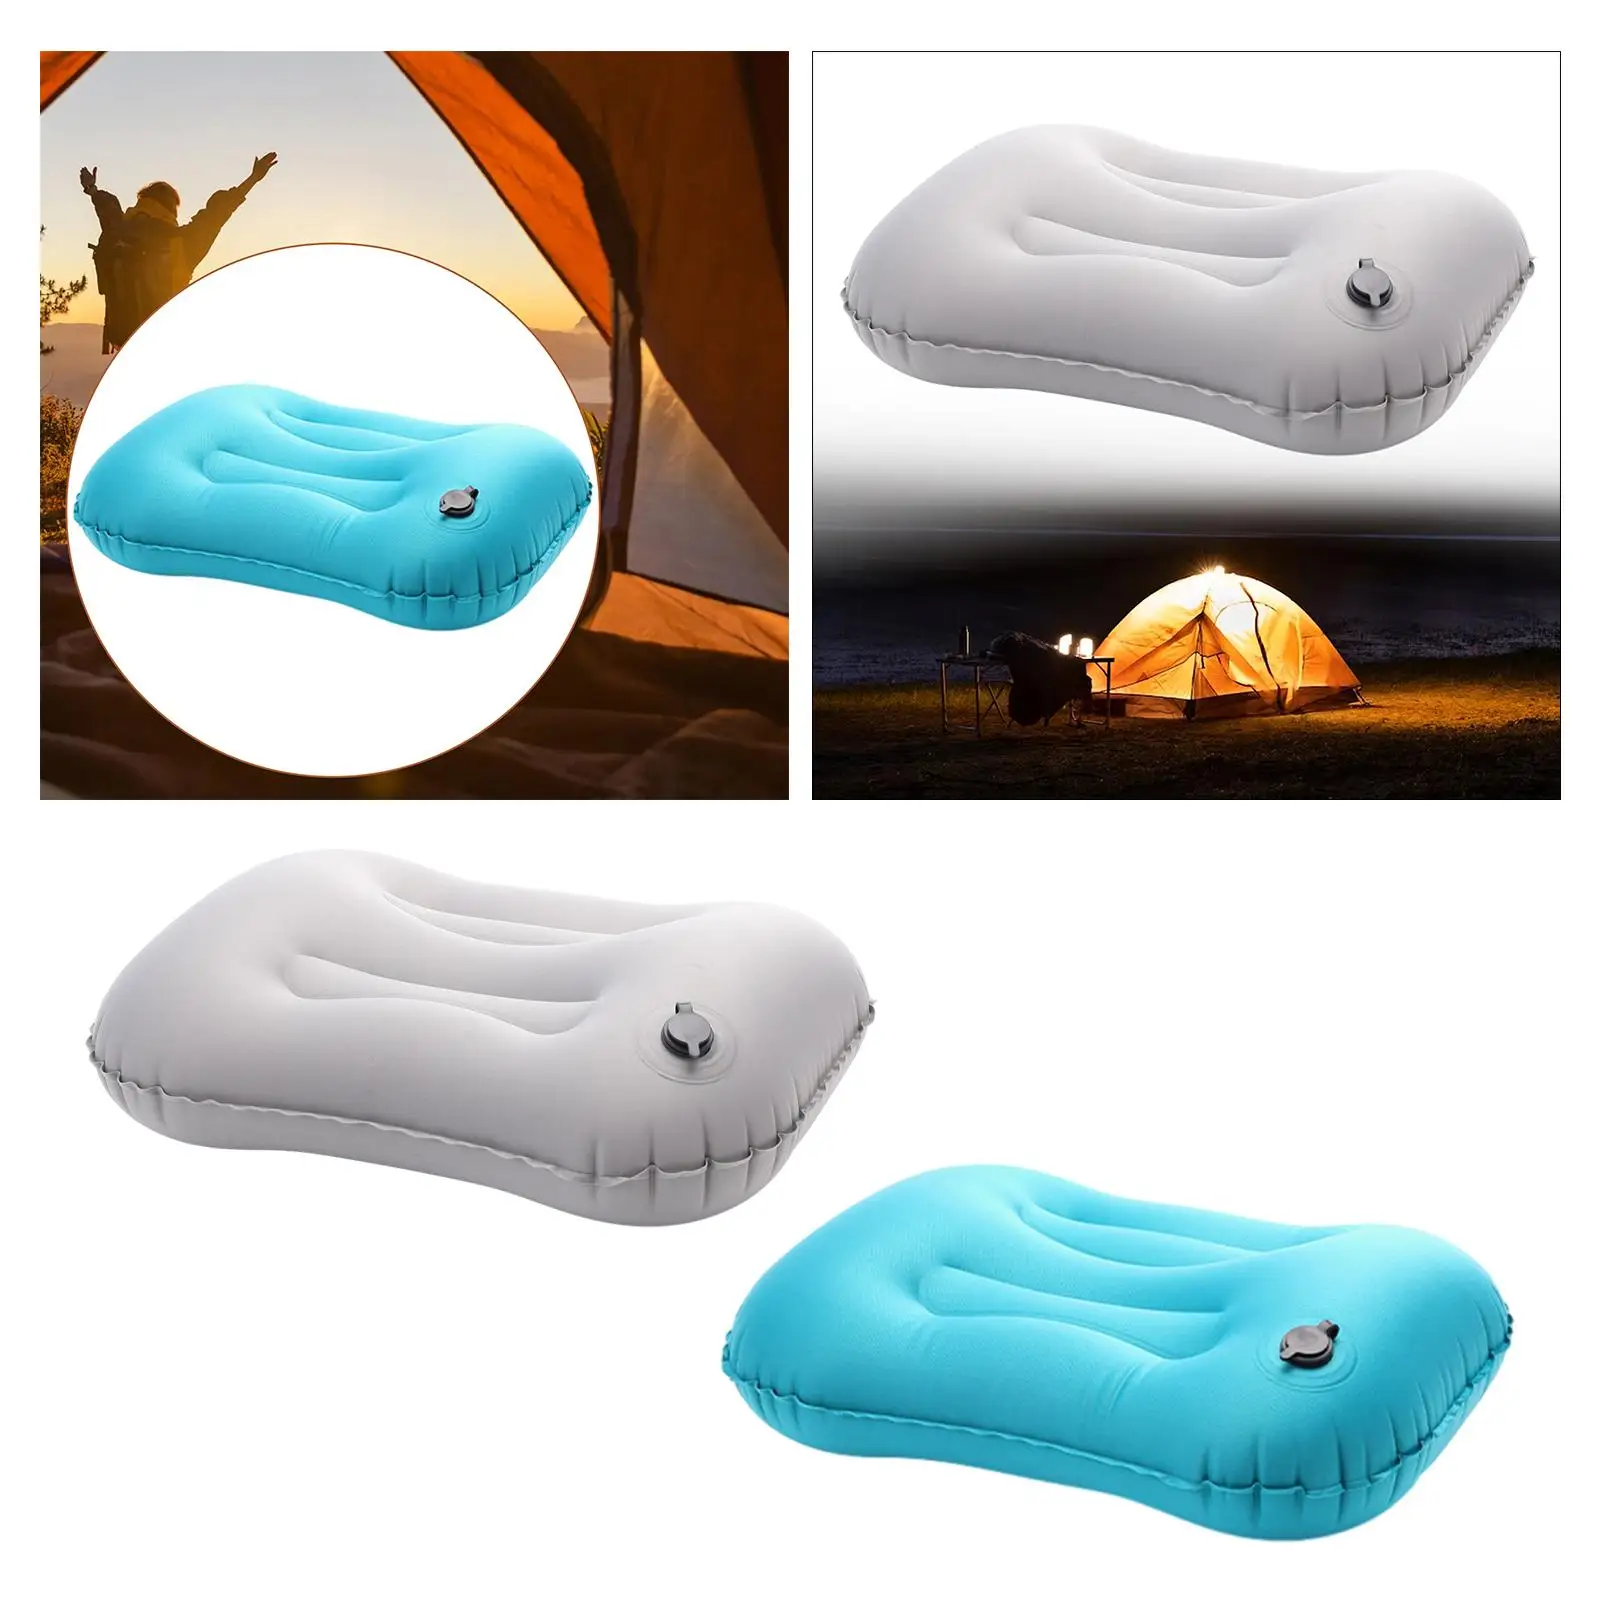 Inflatable Camping Pillow Portable for Neck Lumbar Support Blow up Air Pillow for Nap Rest Hiking Backpacking Hammock Traveling